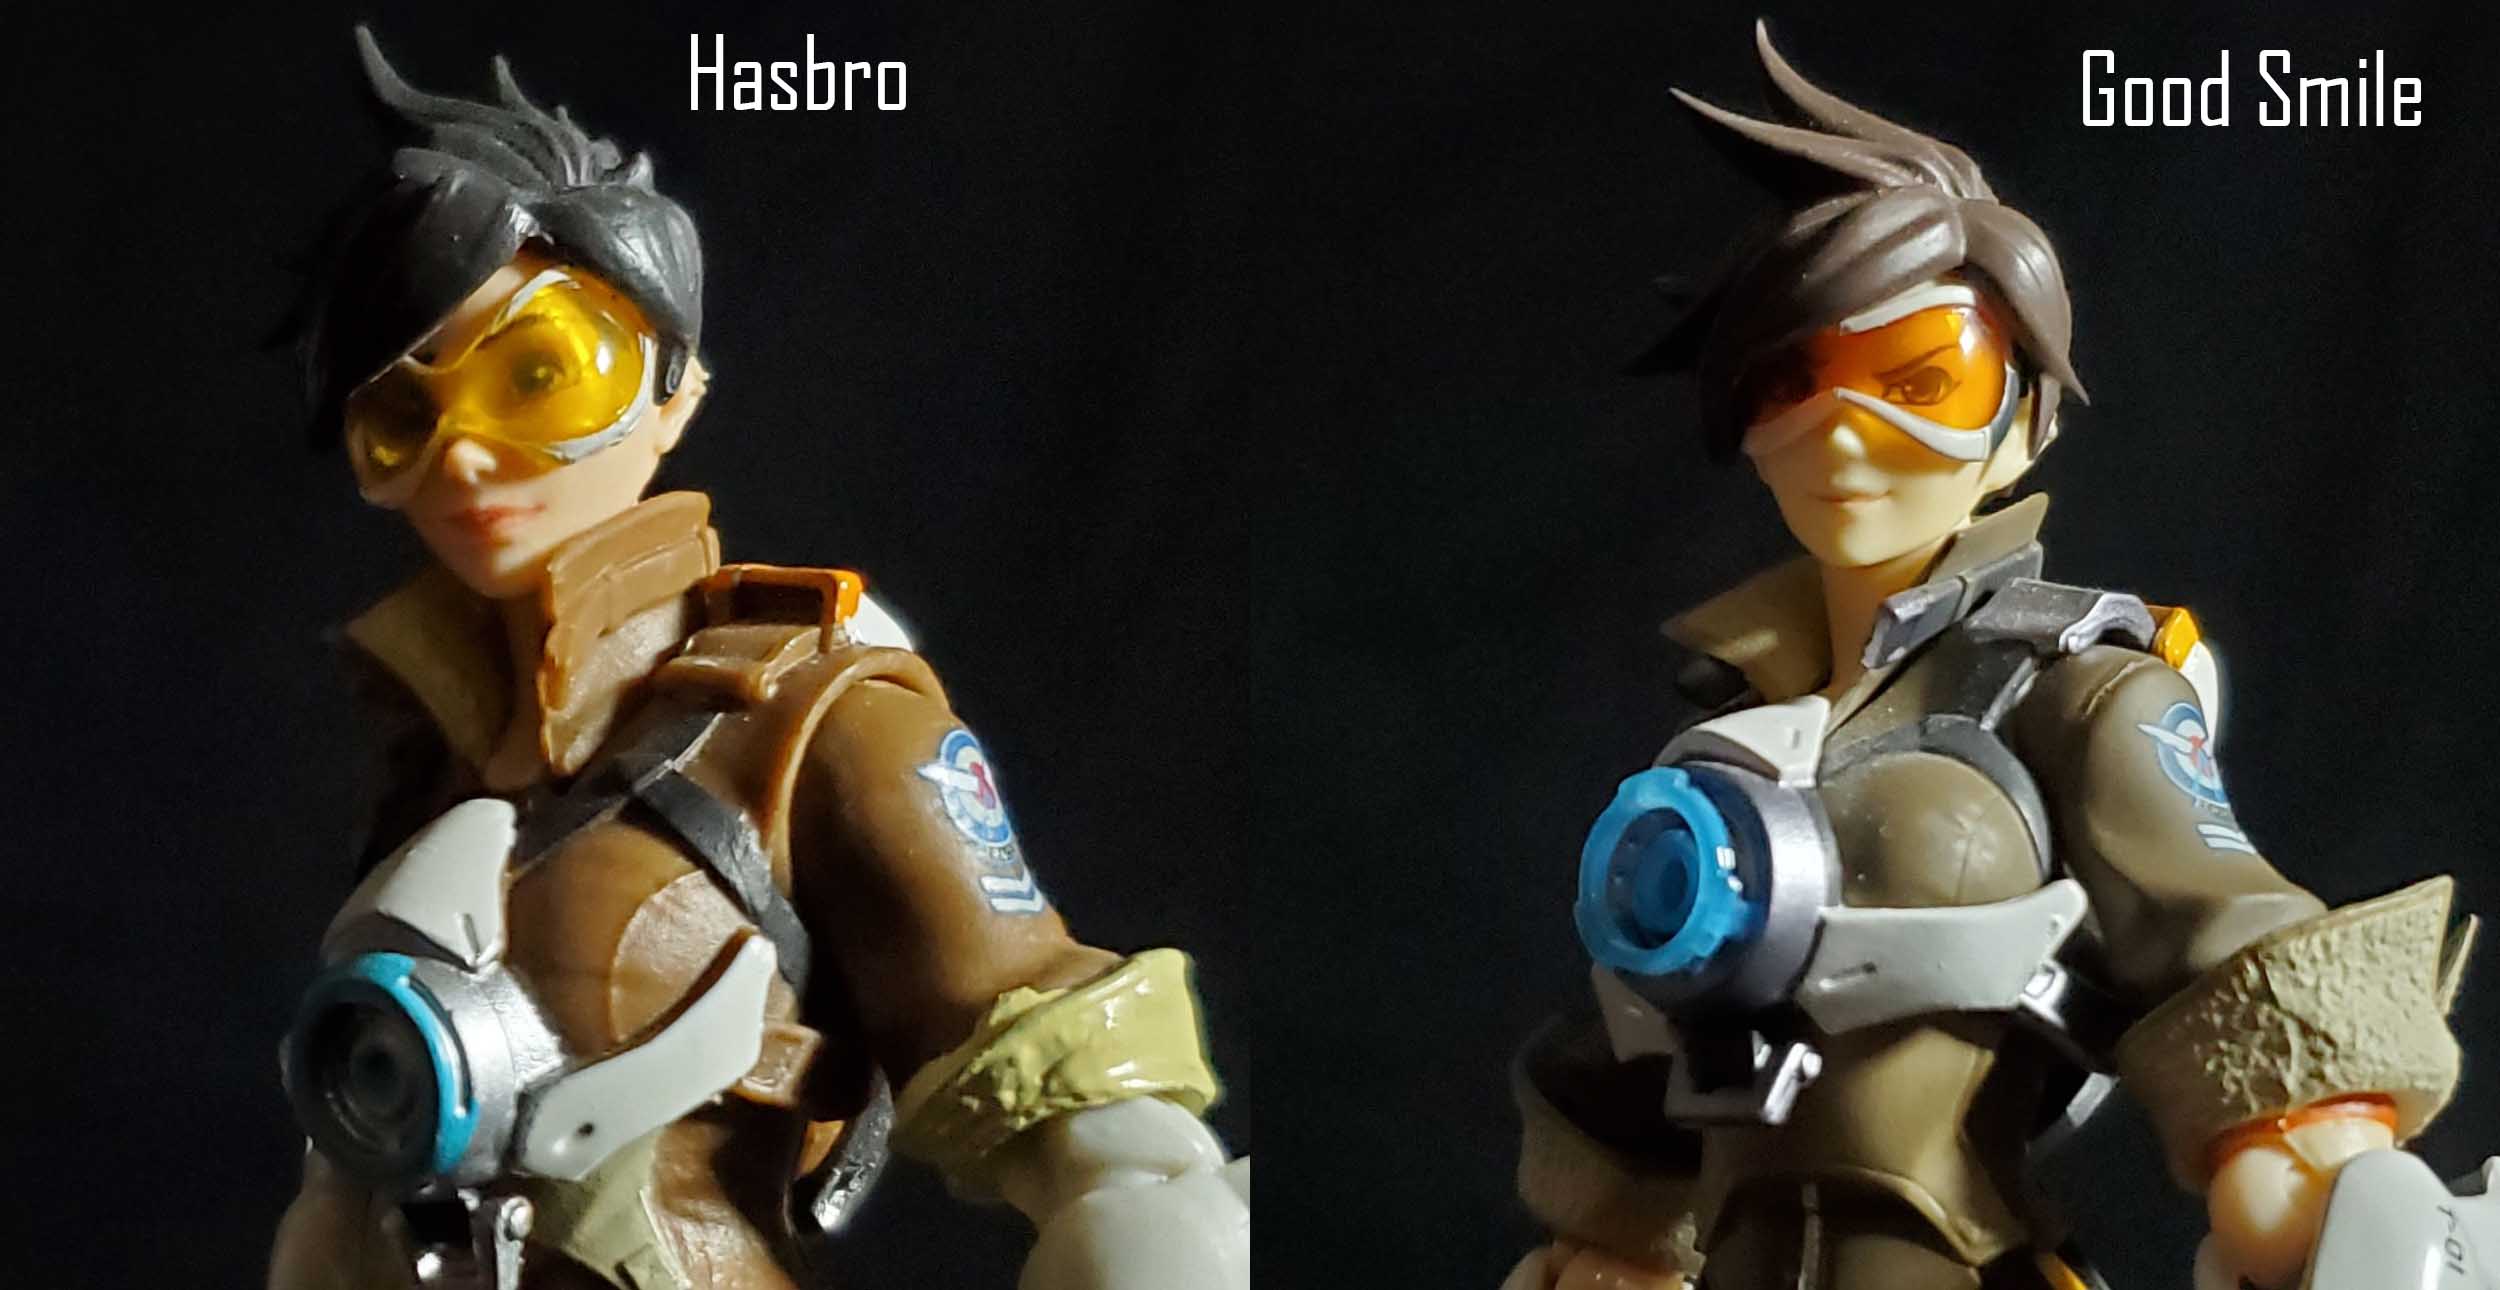 How to Fix Anime Figures | Cakes with Faces